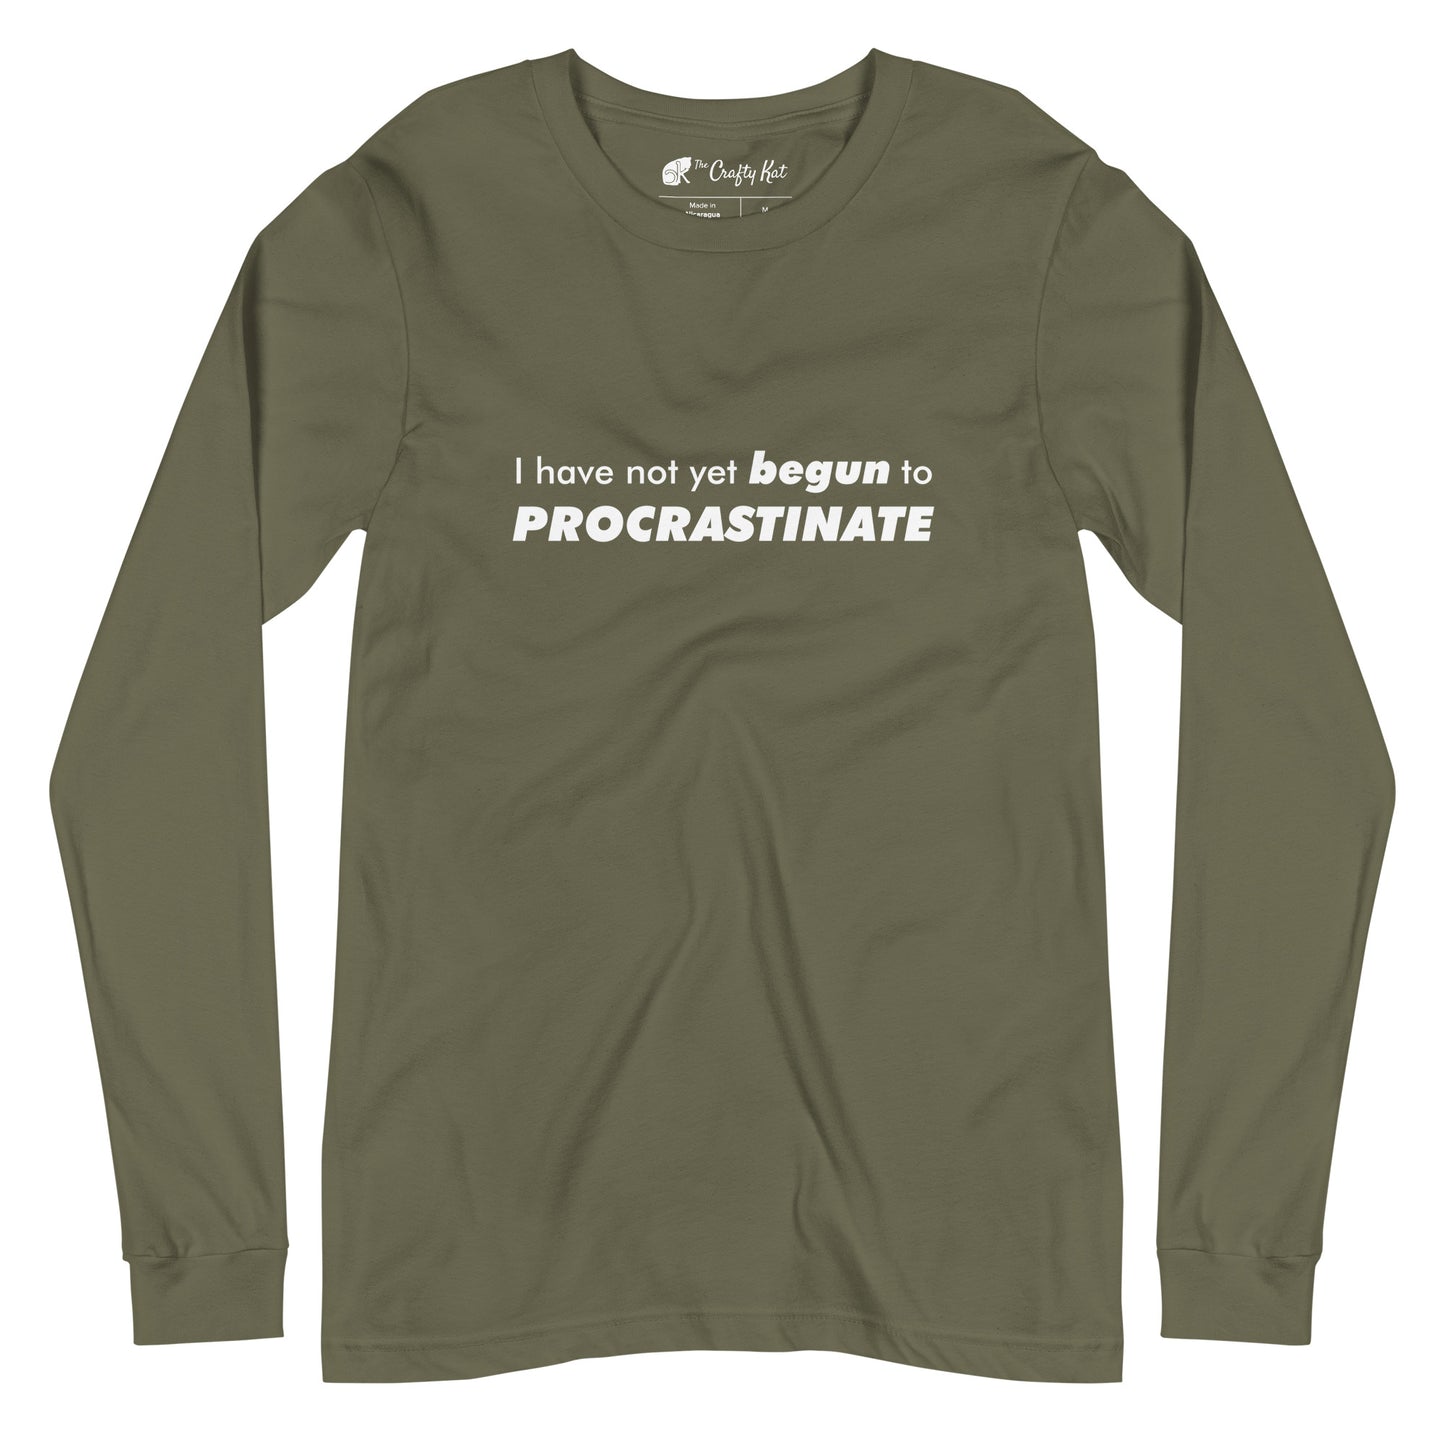 Military Green long-sleeve shirt with text graphic: "I have not yet BEGUN to PROCRASTINATE"